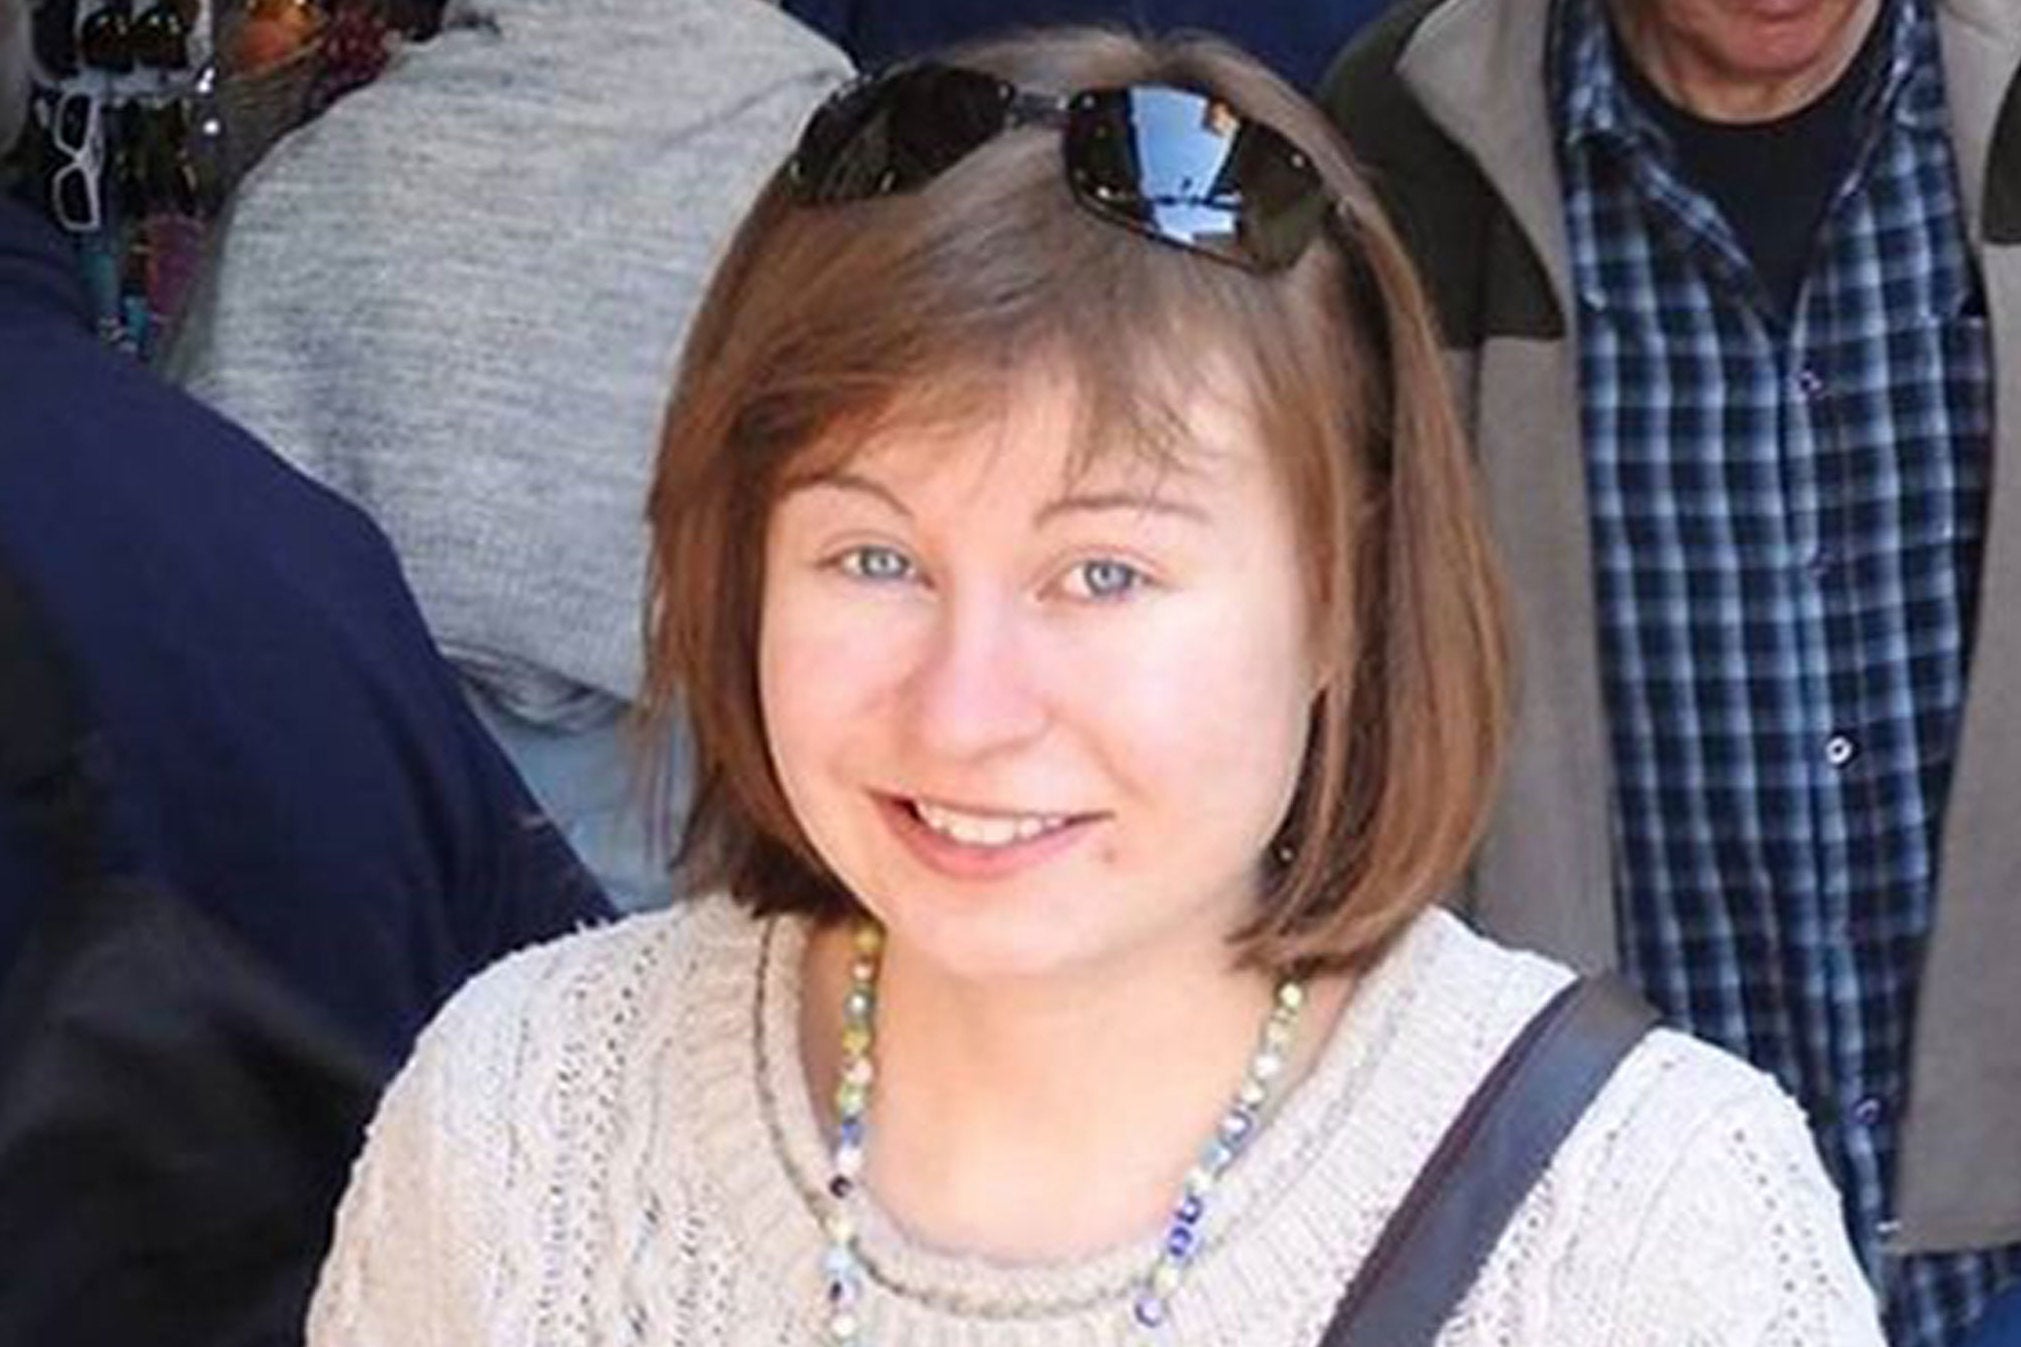 British tourist Hannah Bladon who was stabbed to death in Jerusalem on Good Friday